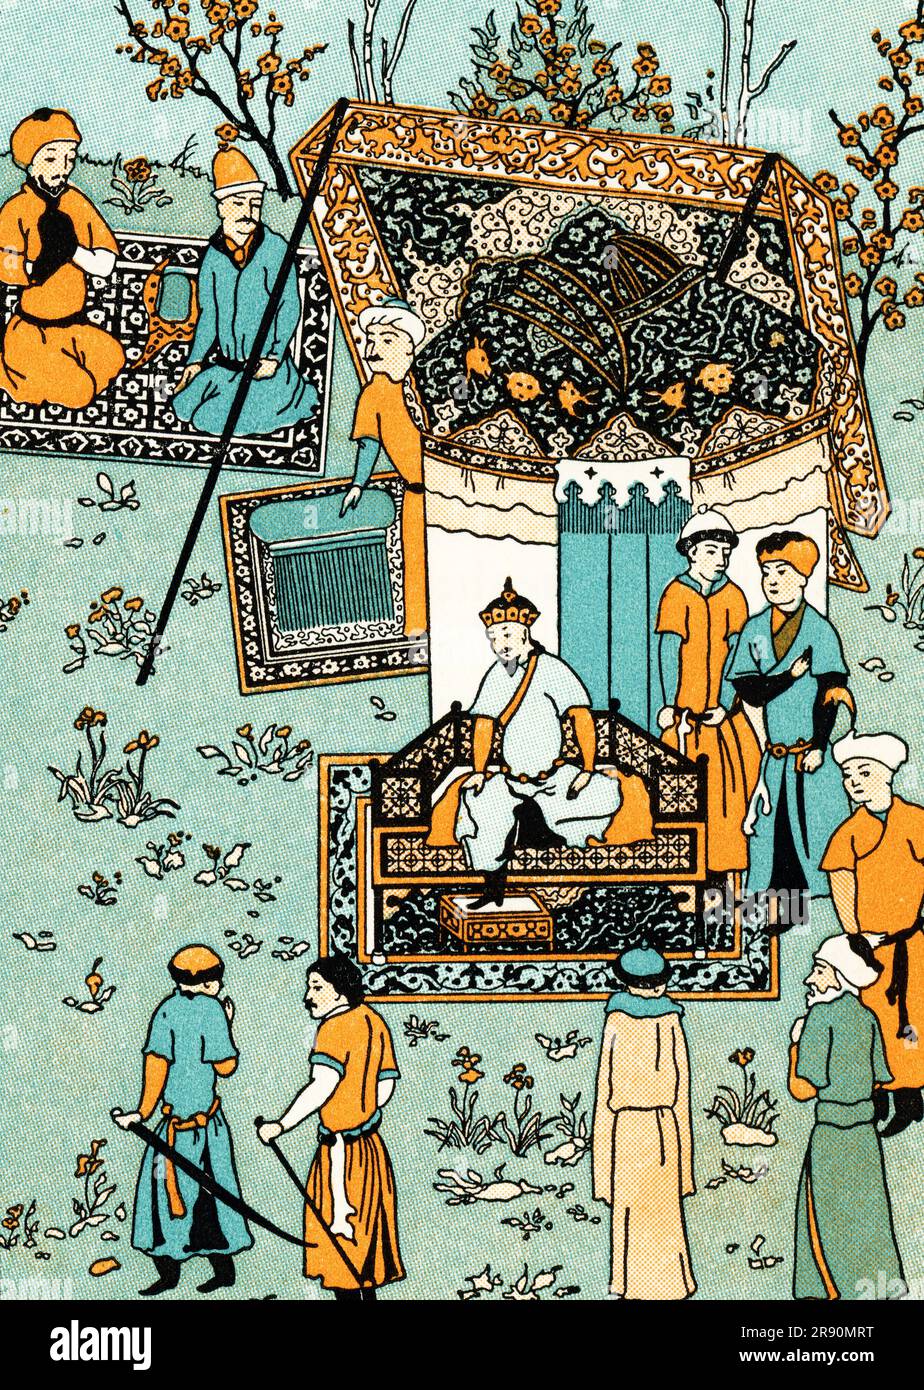 Timur granting audience on the occasion of his accession. After an illustration from the Garrett Zafarnama, 1467. Timur (1336-1405) was a Turco-Mongol conqueror who founded the Timurid Empire in and around modern-day Afghanistan, Iran, and Central Asia, becoming the first ruler of the Timurid dynasty. Stock Photo